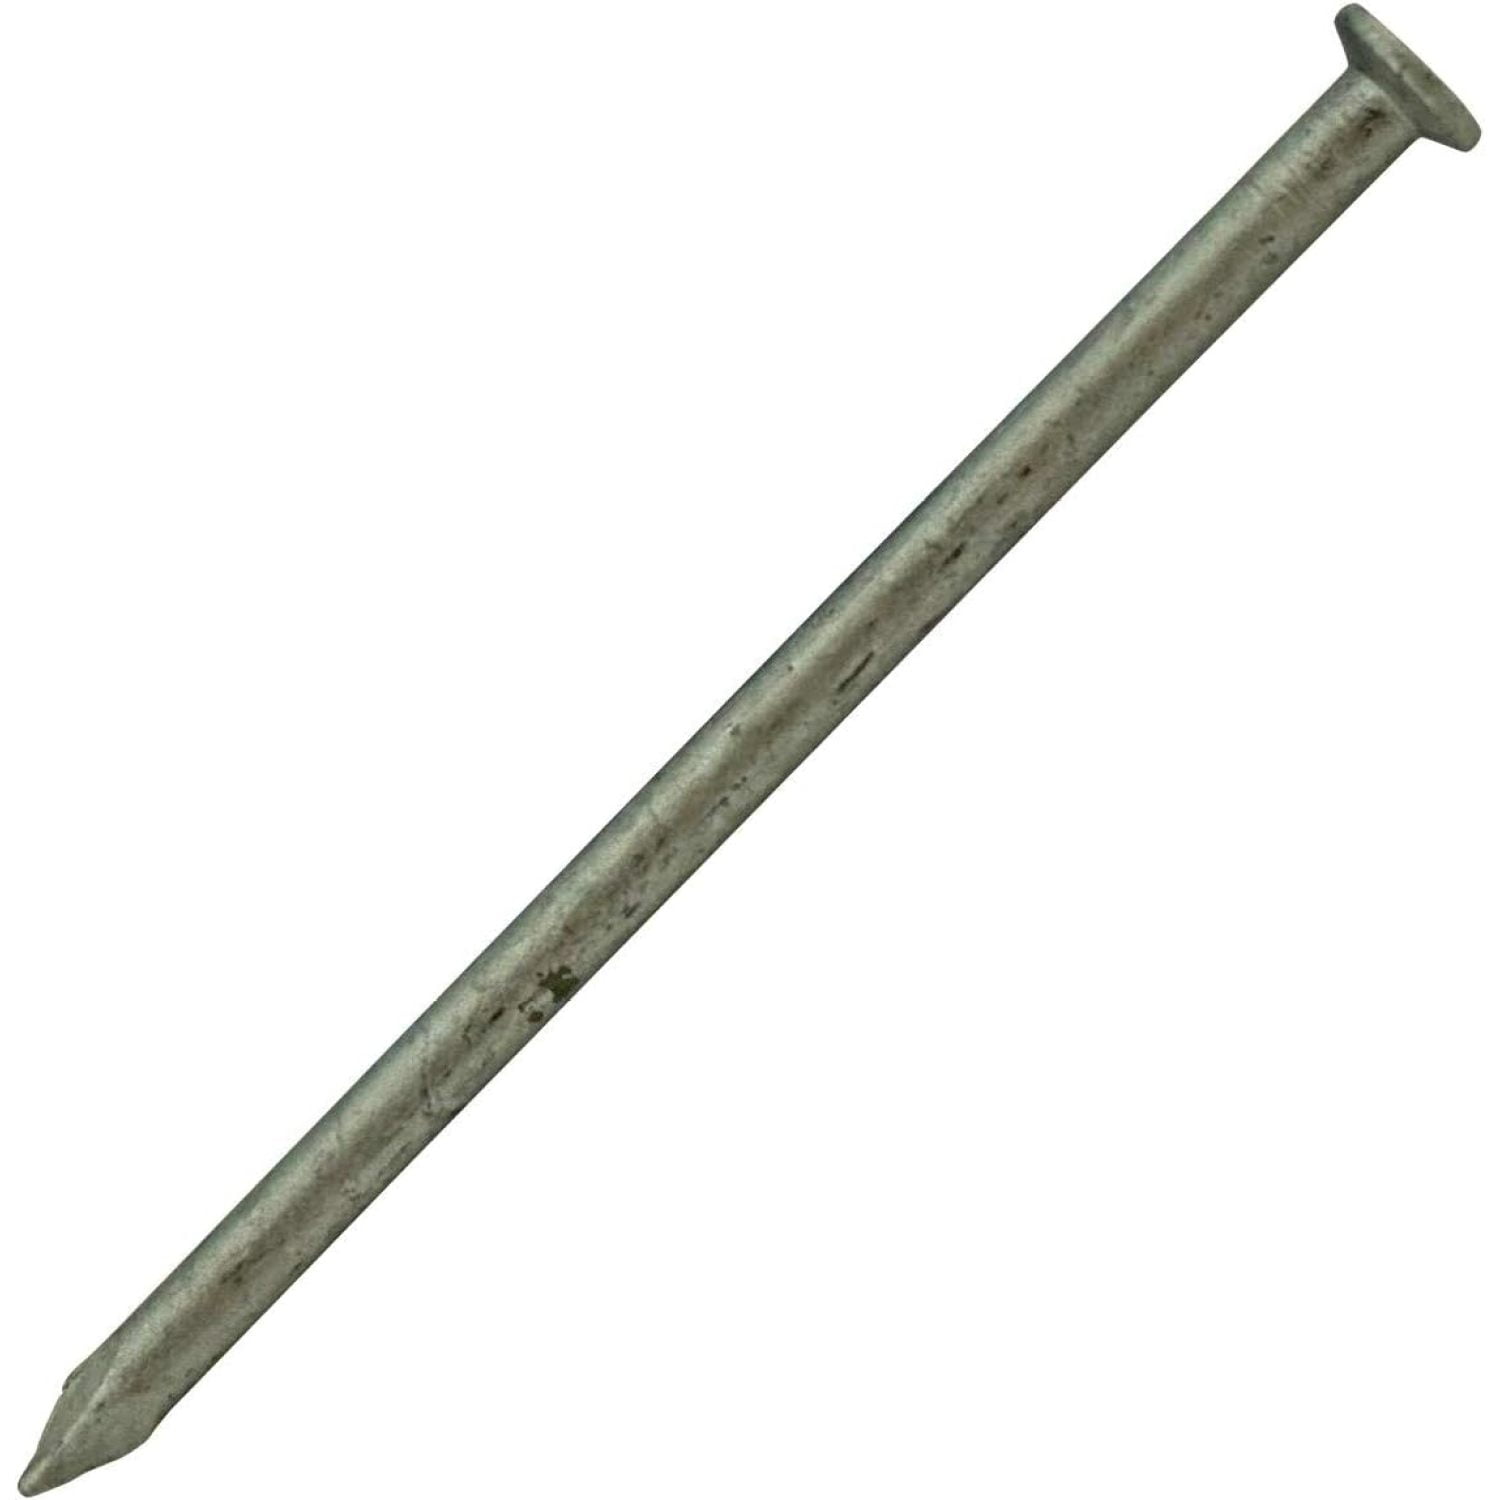 Plastic Edging Spikes - Buy Online & Save